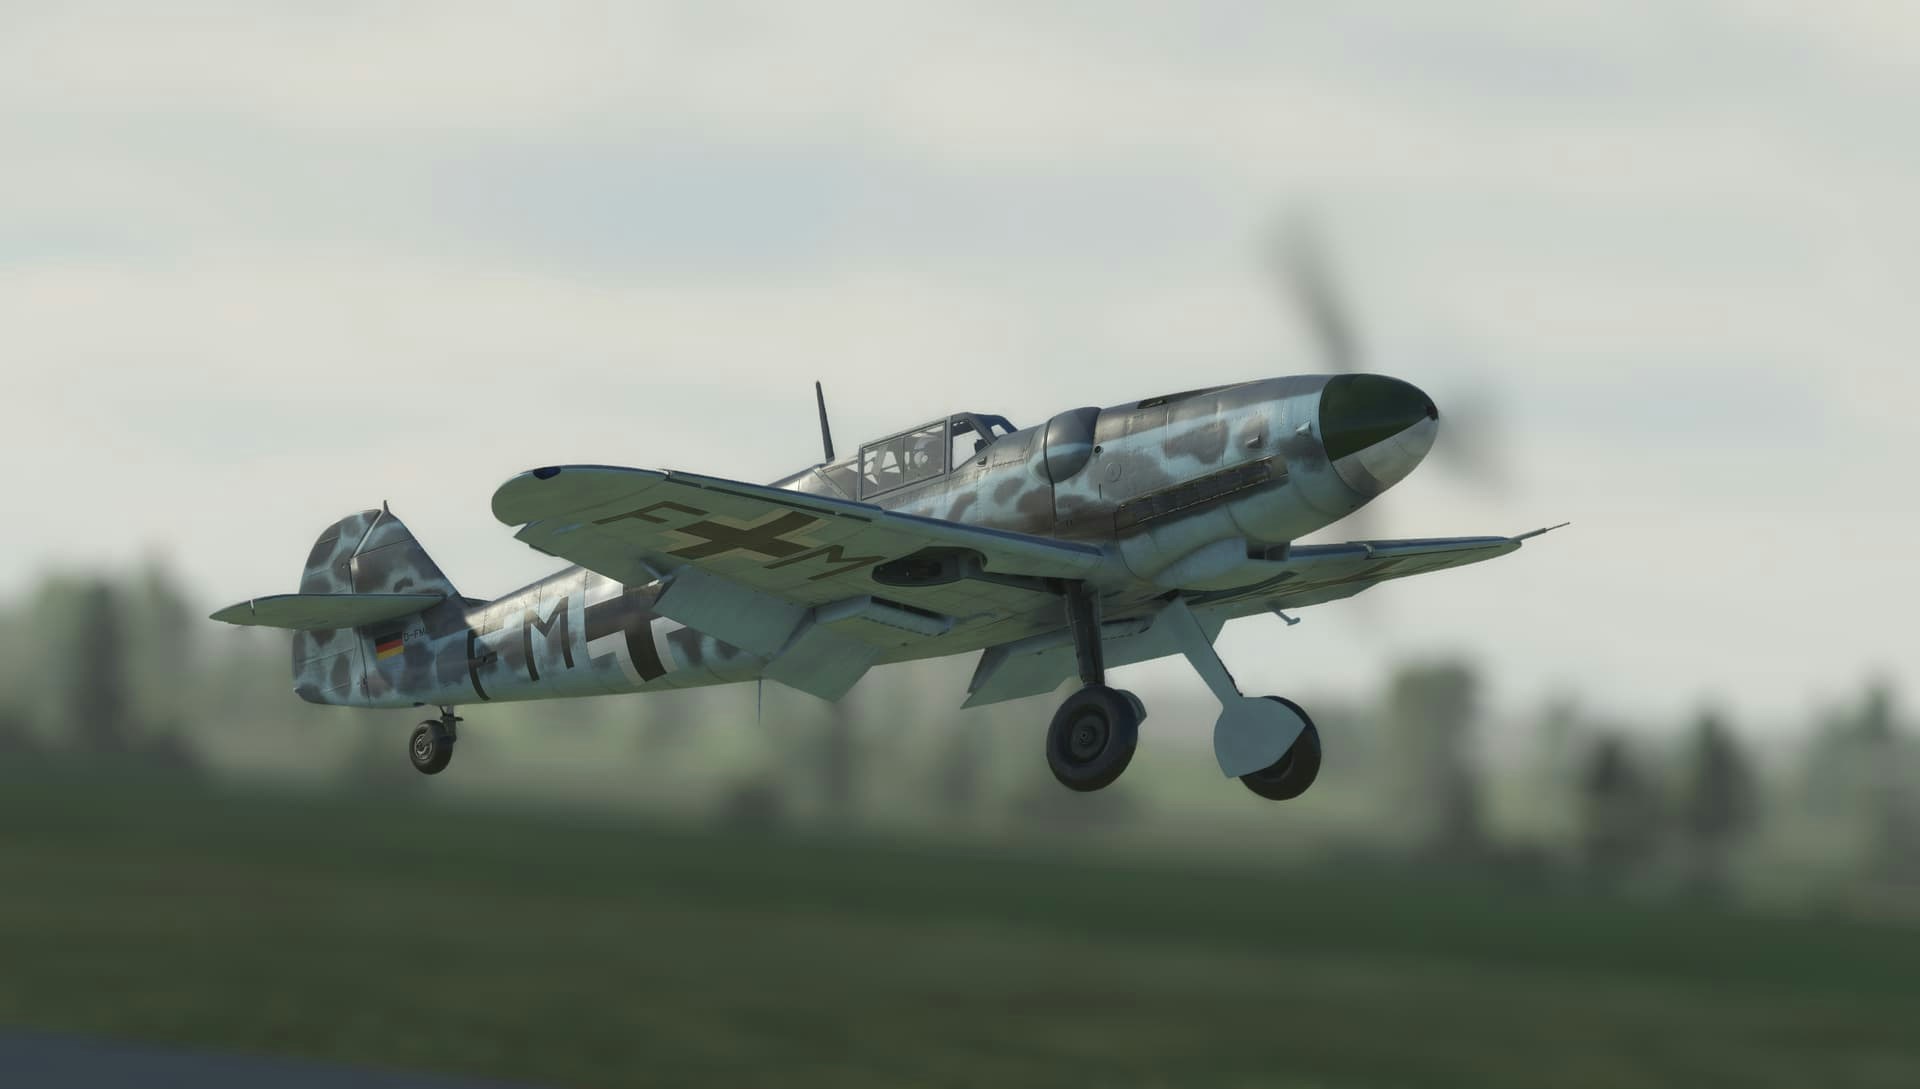 FlyingIron Simulations Bf 109 to Release Next Week